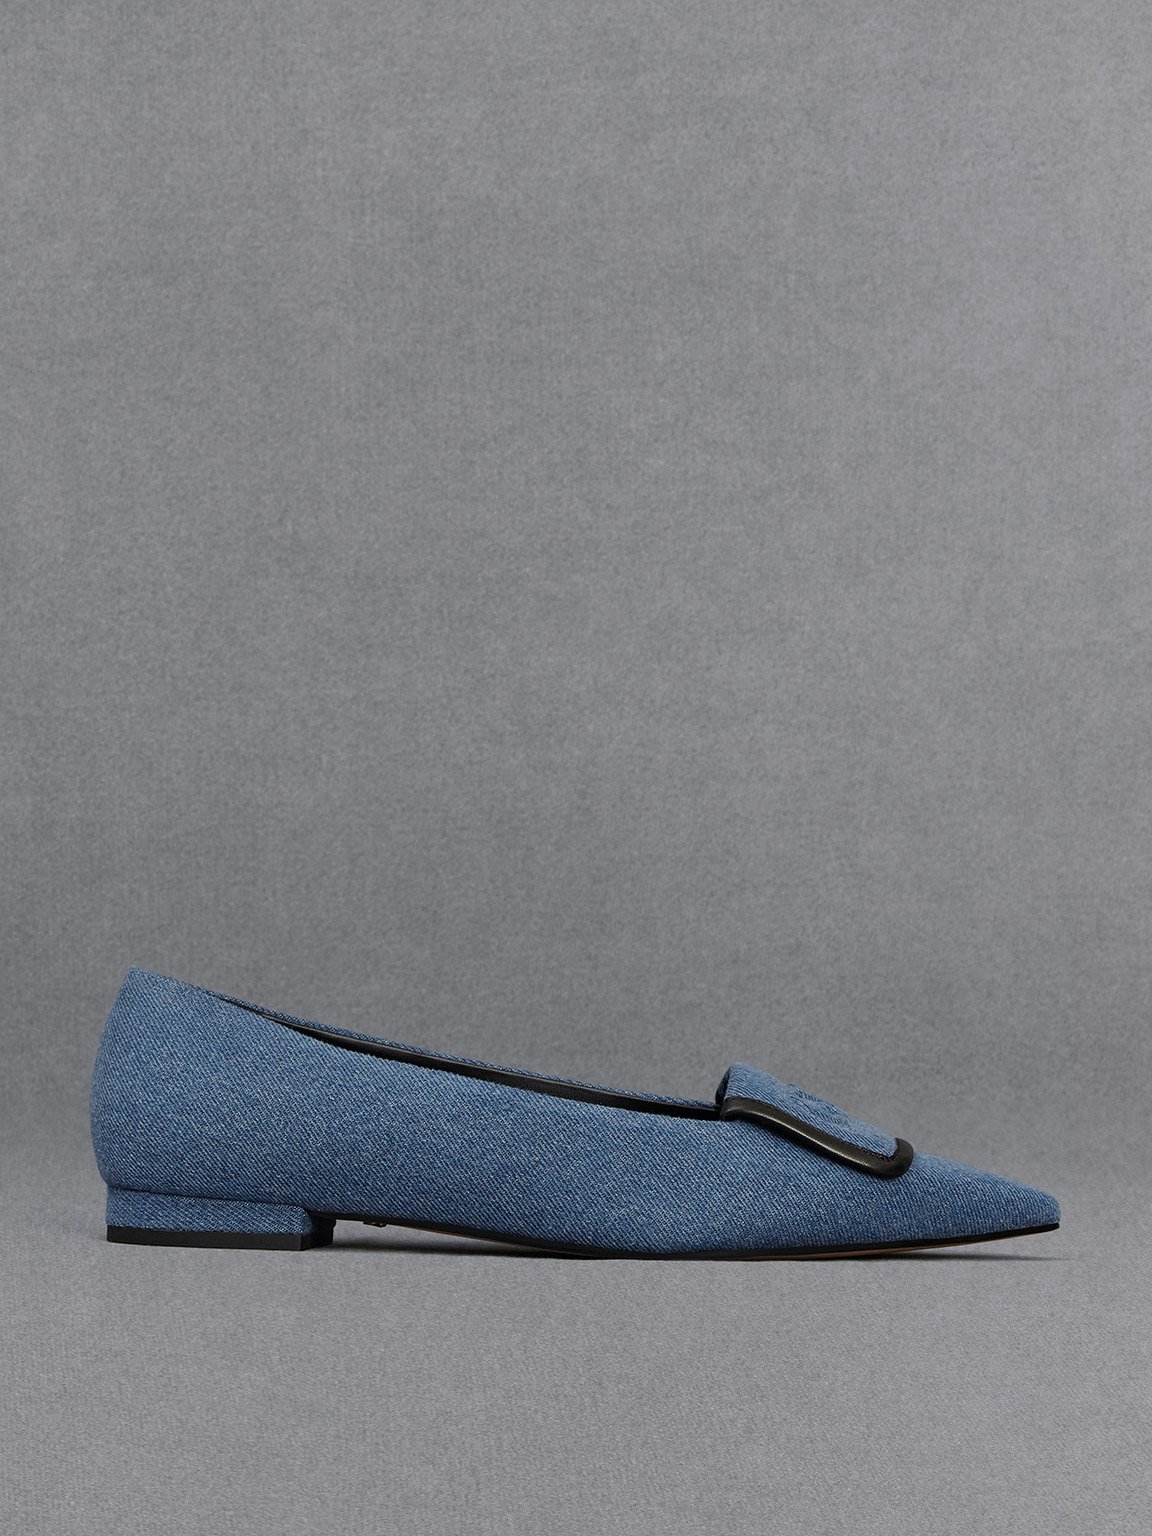 Leather & Denim Pointed-Toe Flats